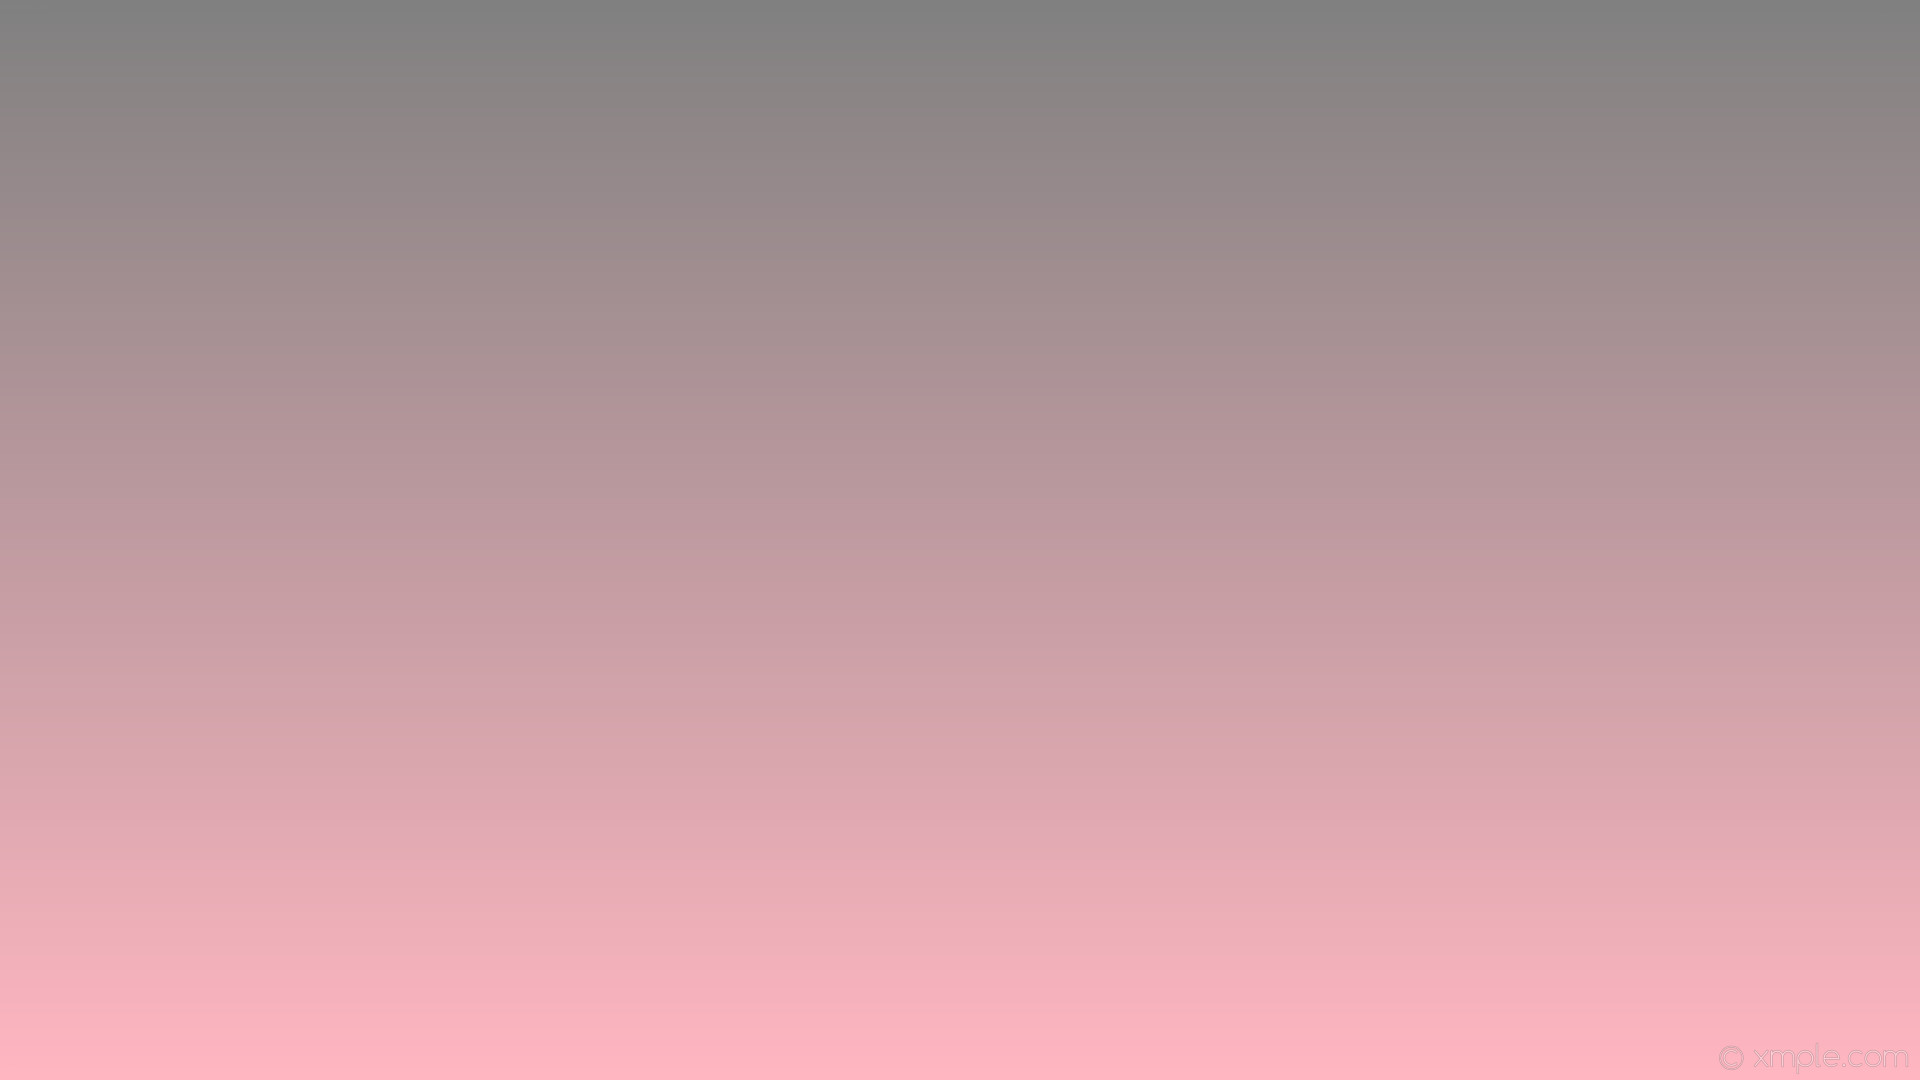 Solid Colors - Pink And Grey Gradient , HD Wallpaper & Backgrounds